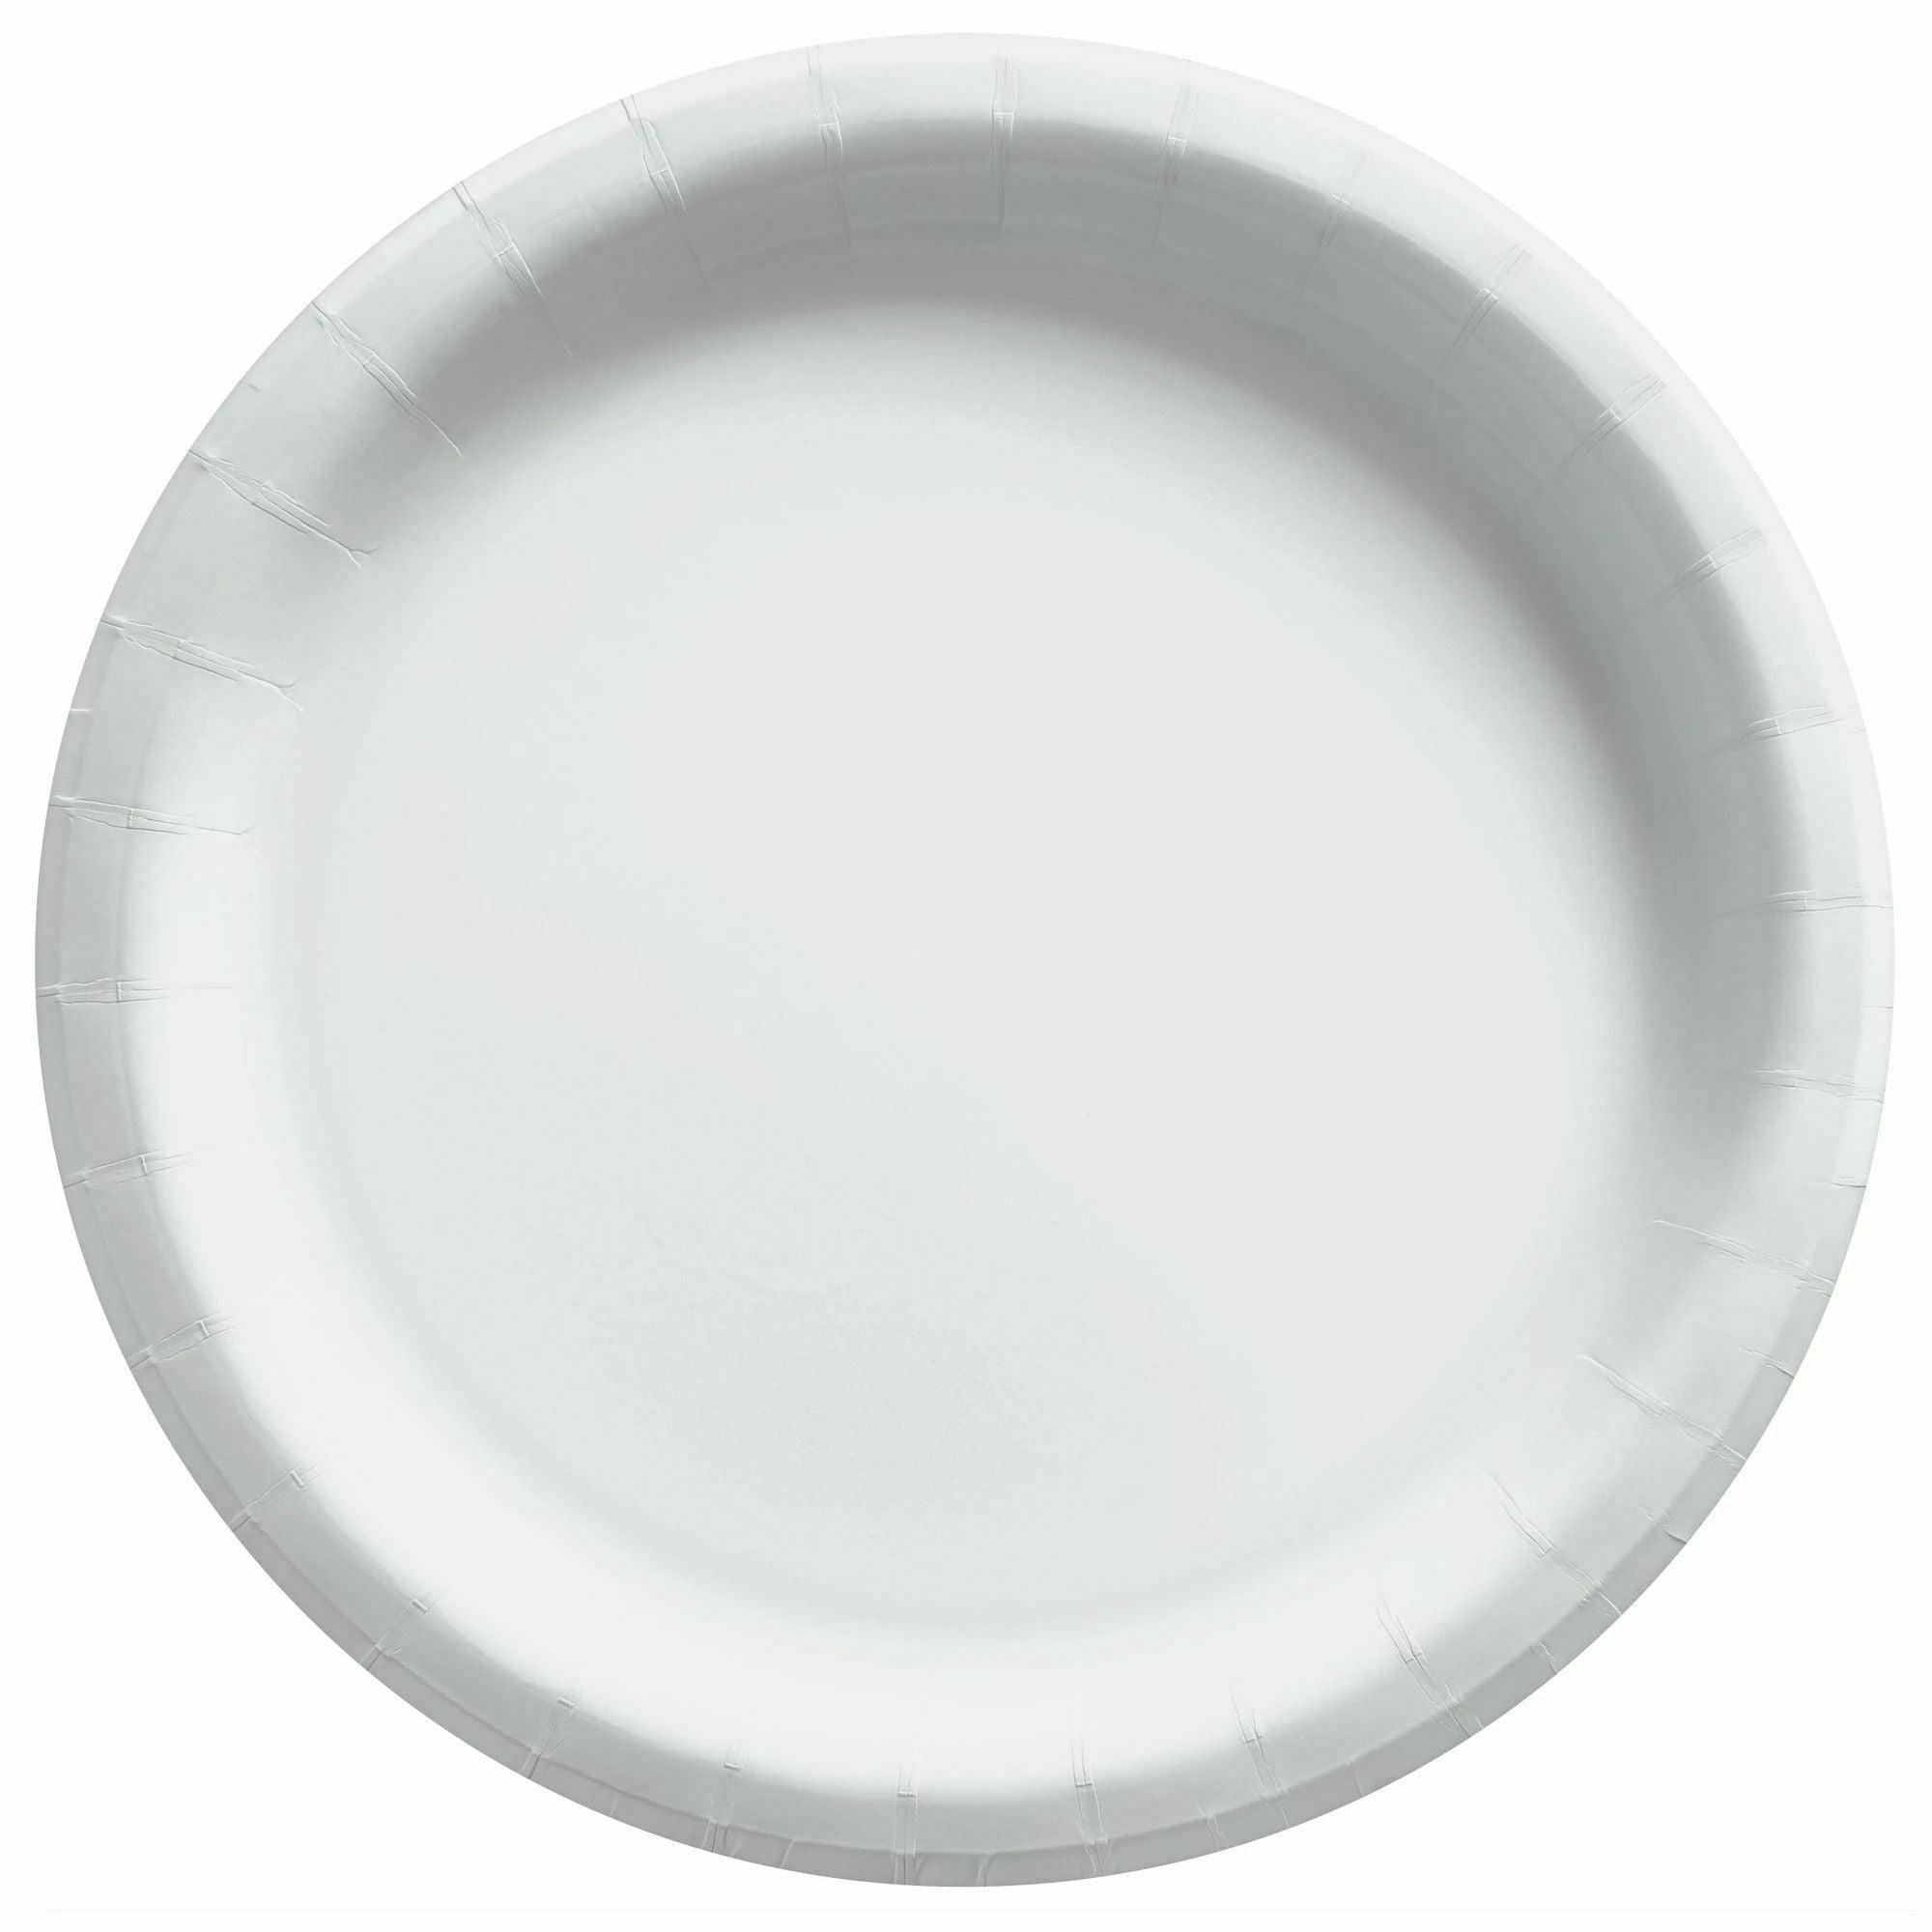 Amscan BASIC Grocery Frosty White - 8 1/2" Round Paper Plates, High Ct.